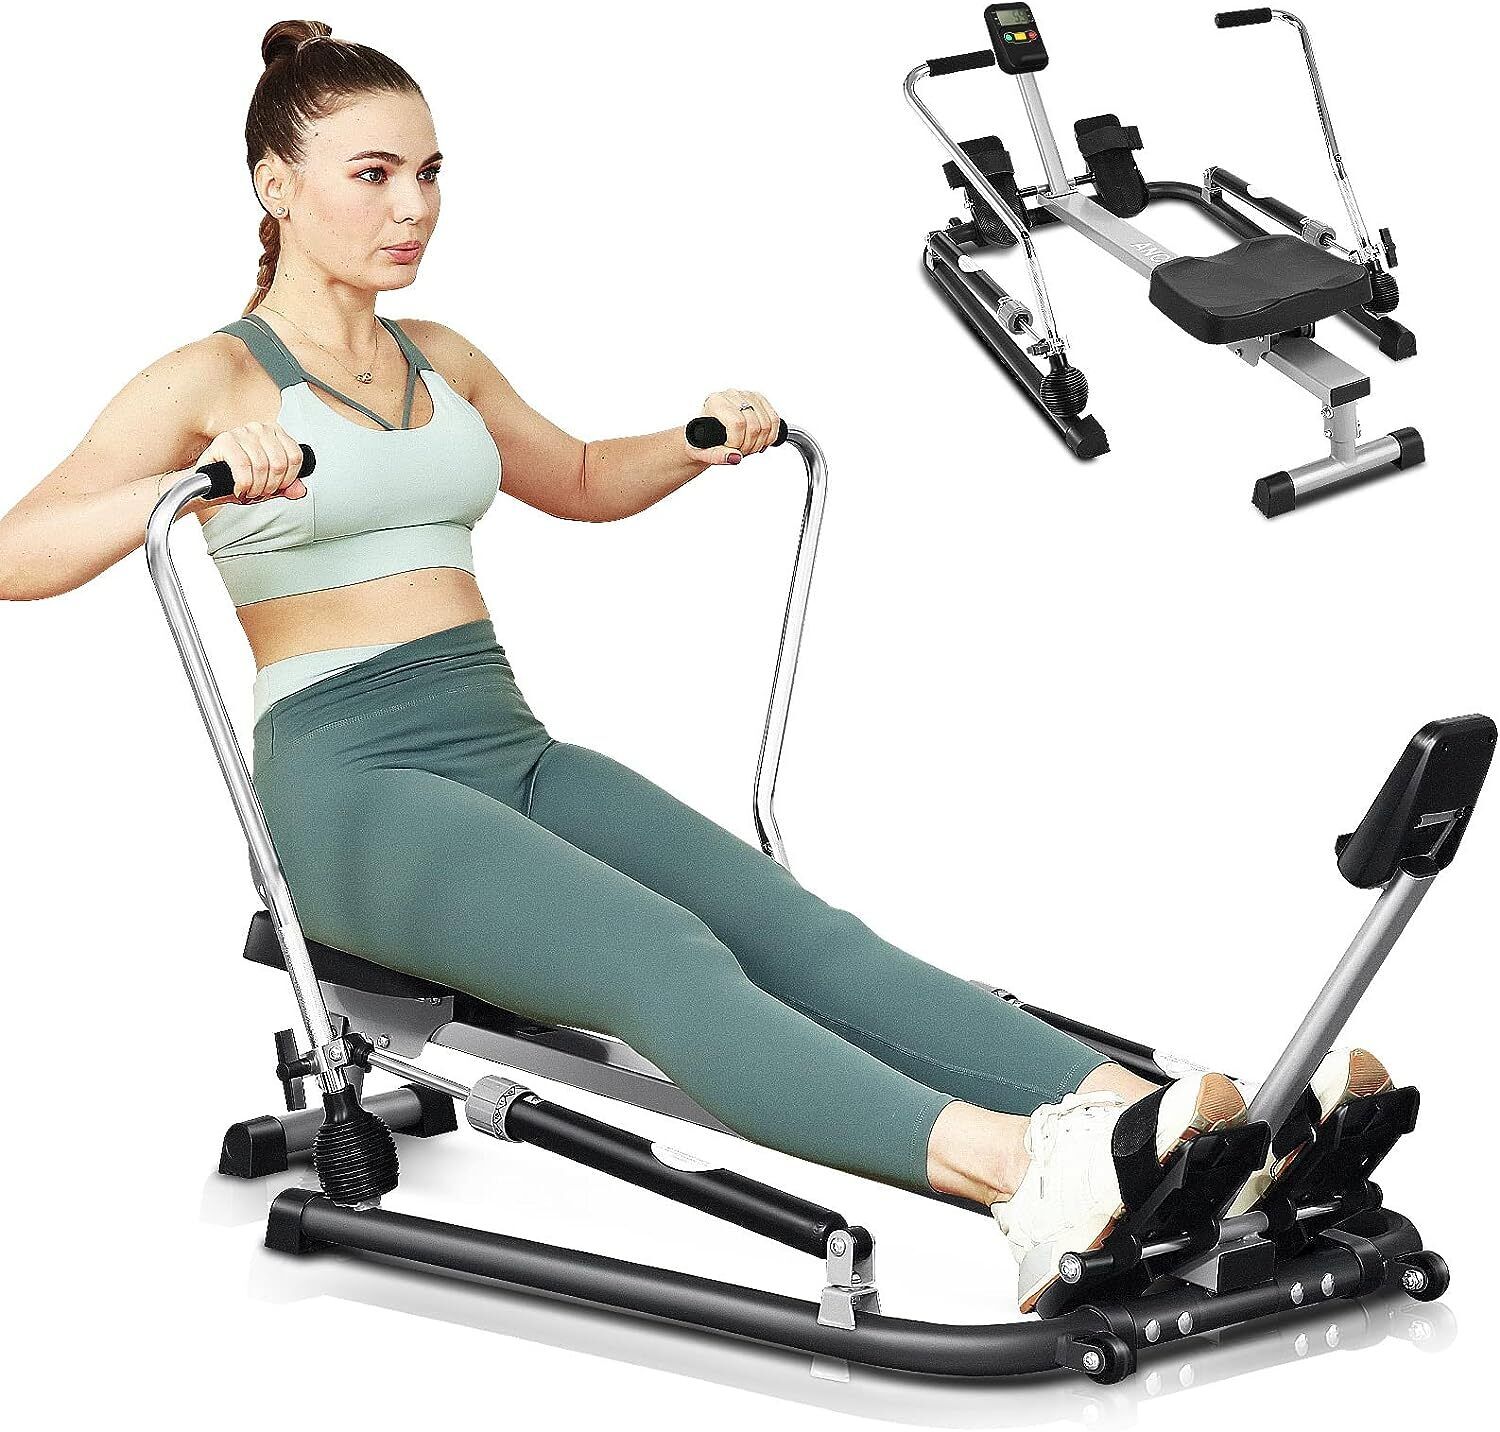 ANCHEER Rowing Machines for Home Use, Foldable Hydraulic Rower Machine Exercise